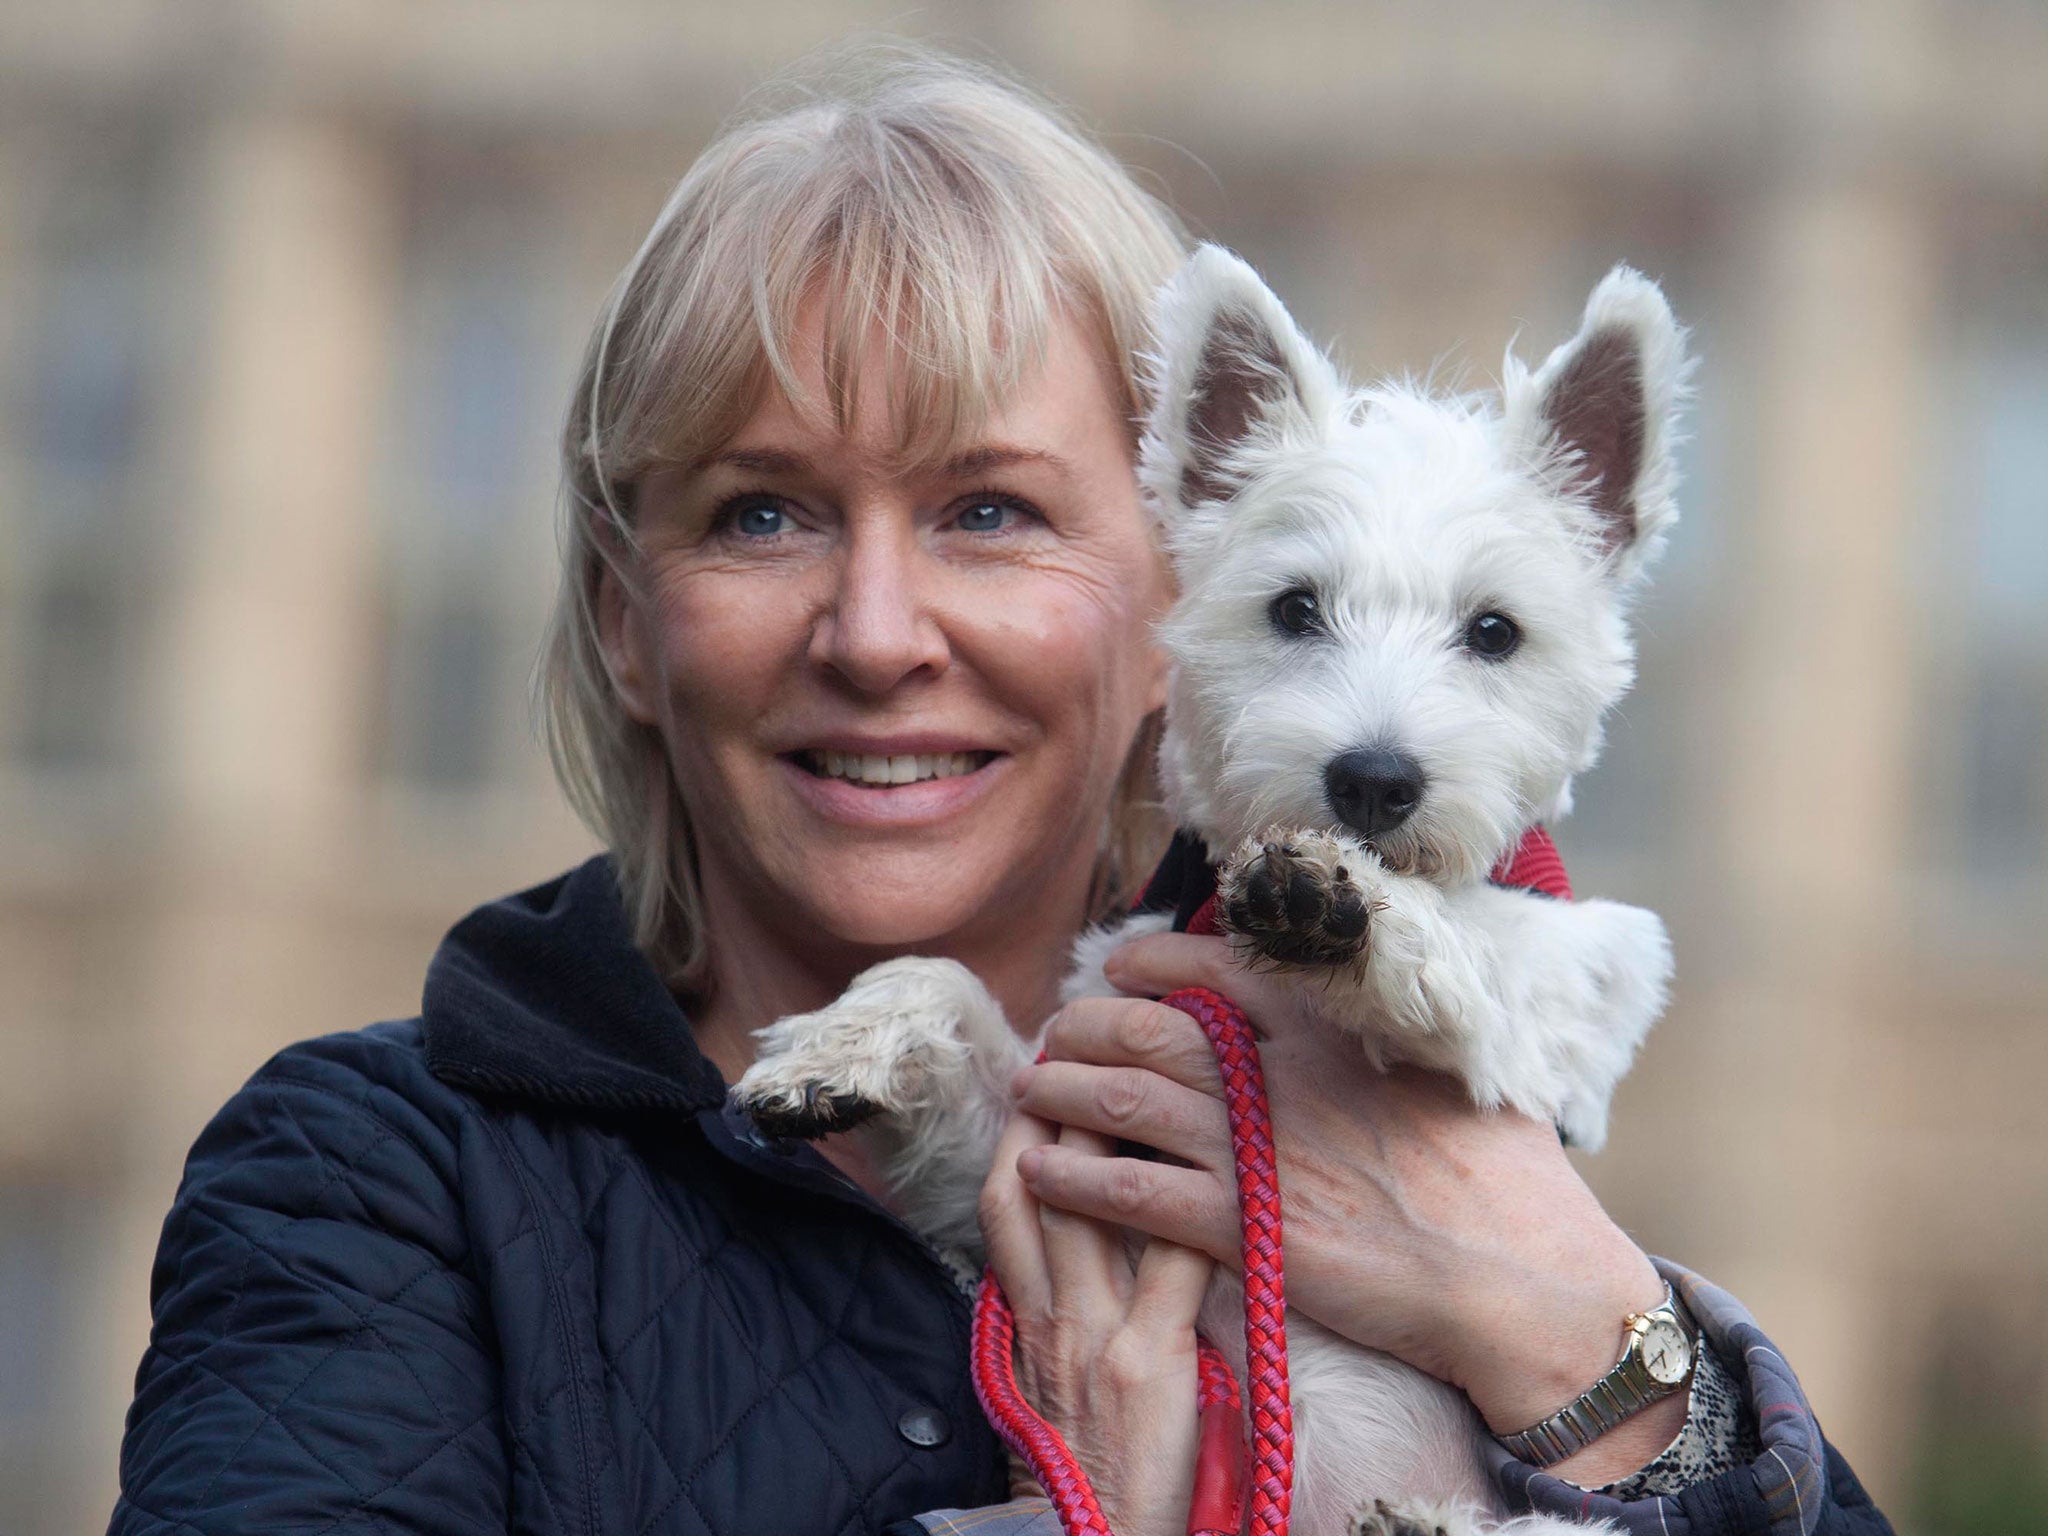 Nadine Dorries MP for Mid Bedfordshire with her West Highland Terrier, Darcey